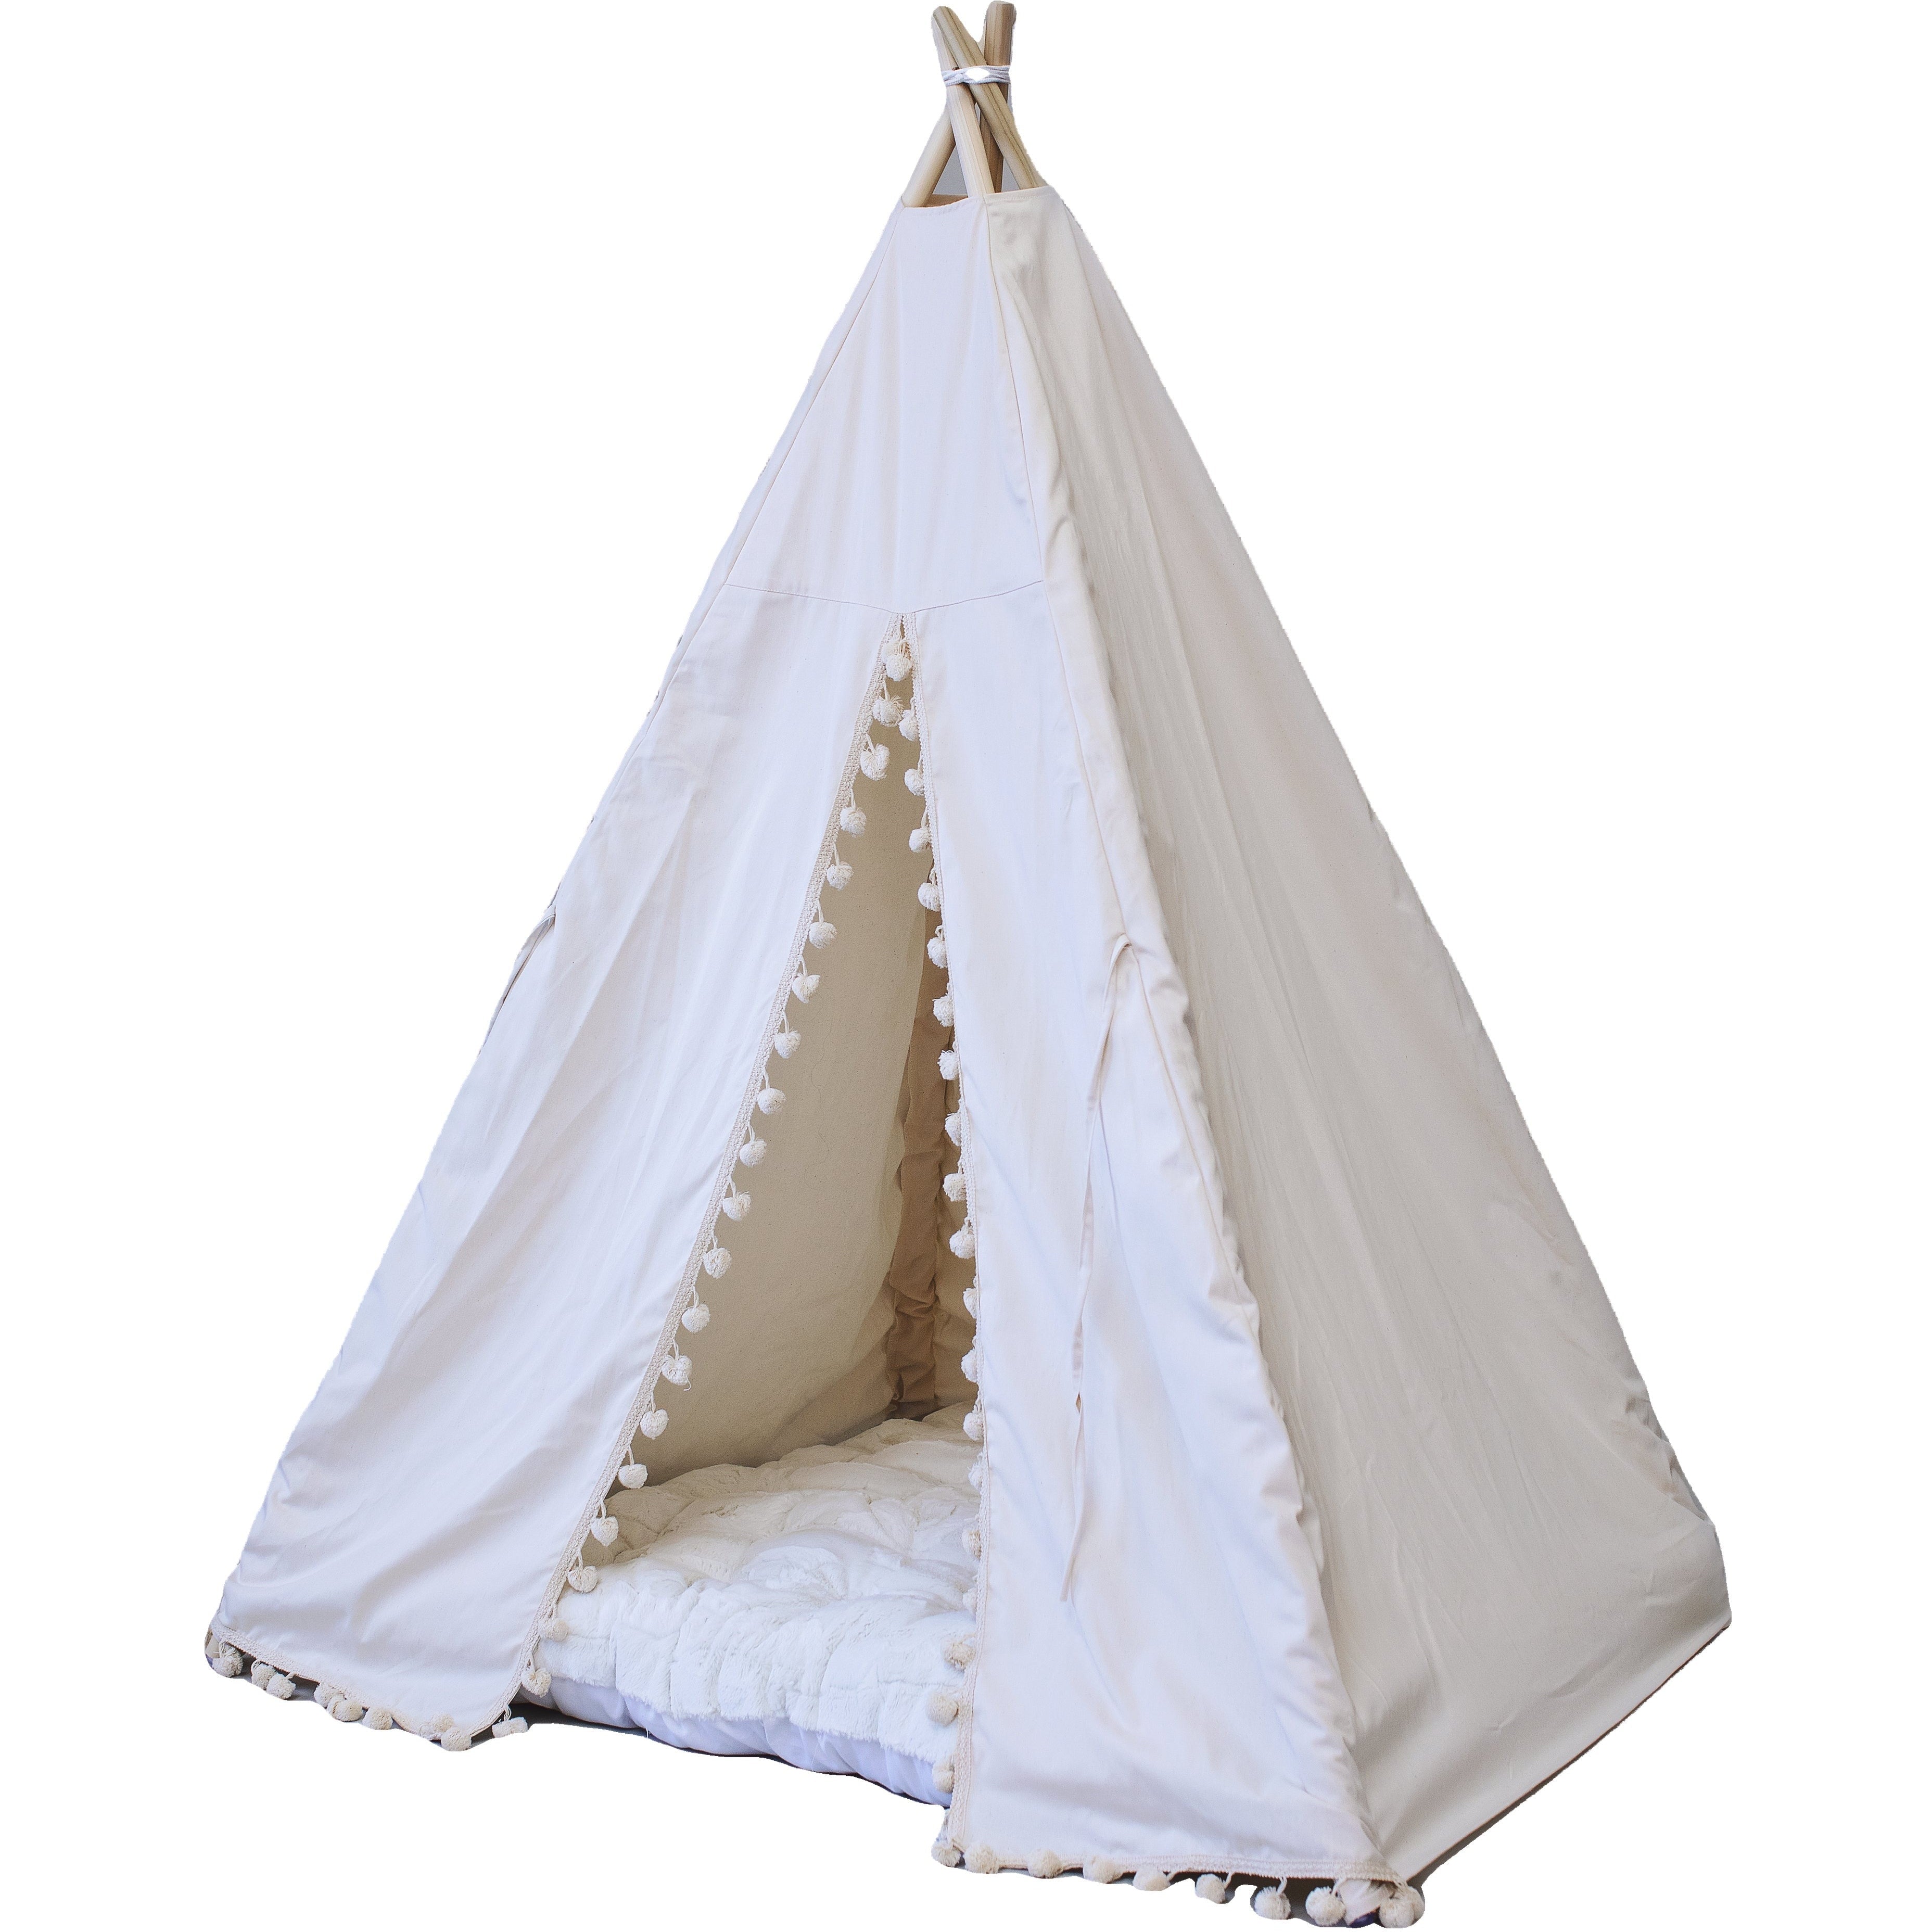 The Adrian Play Tent